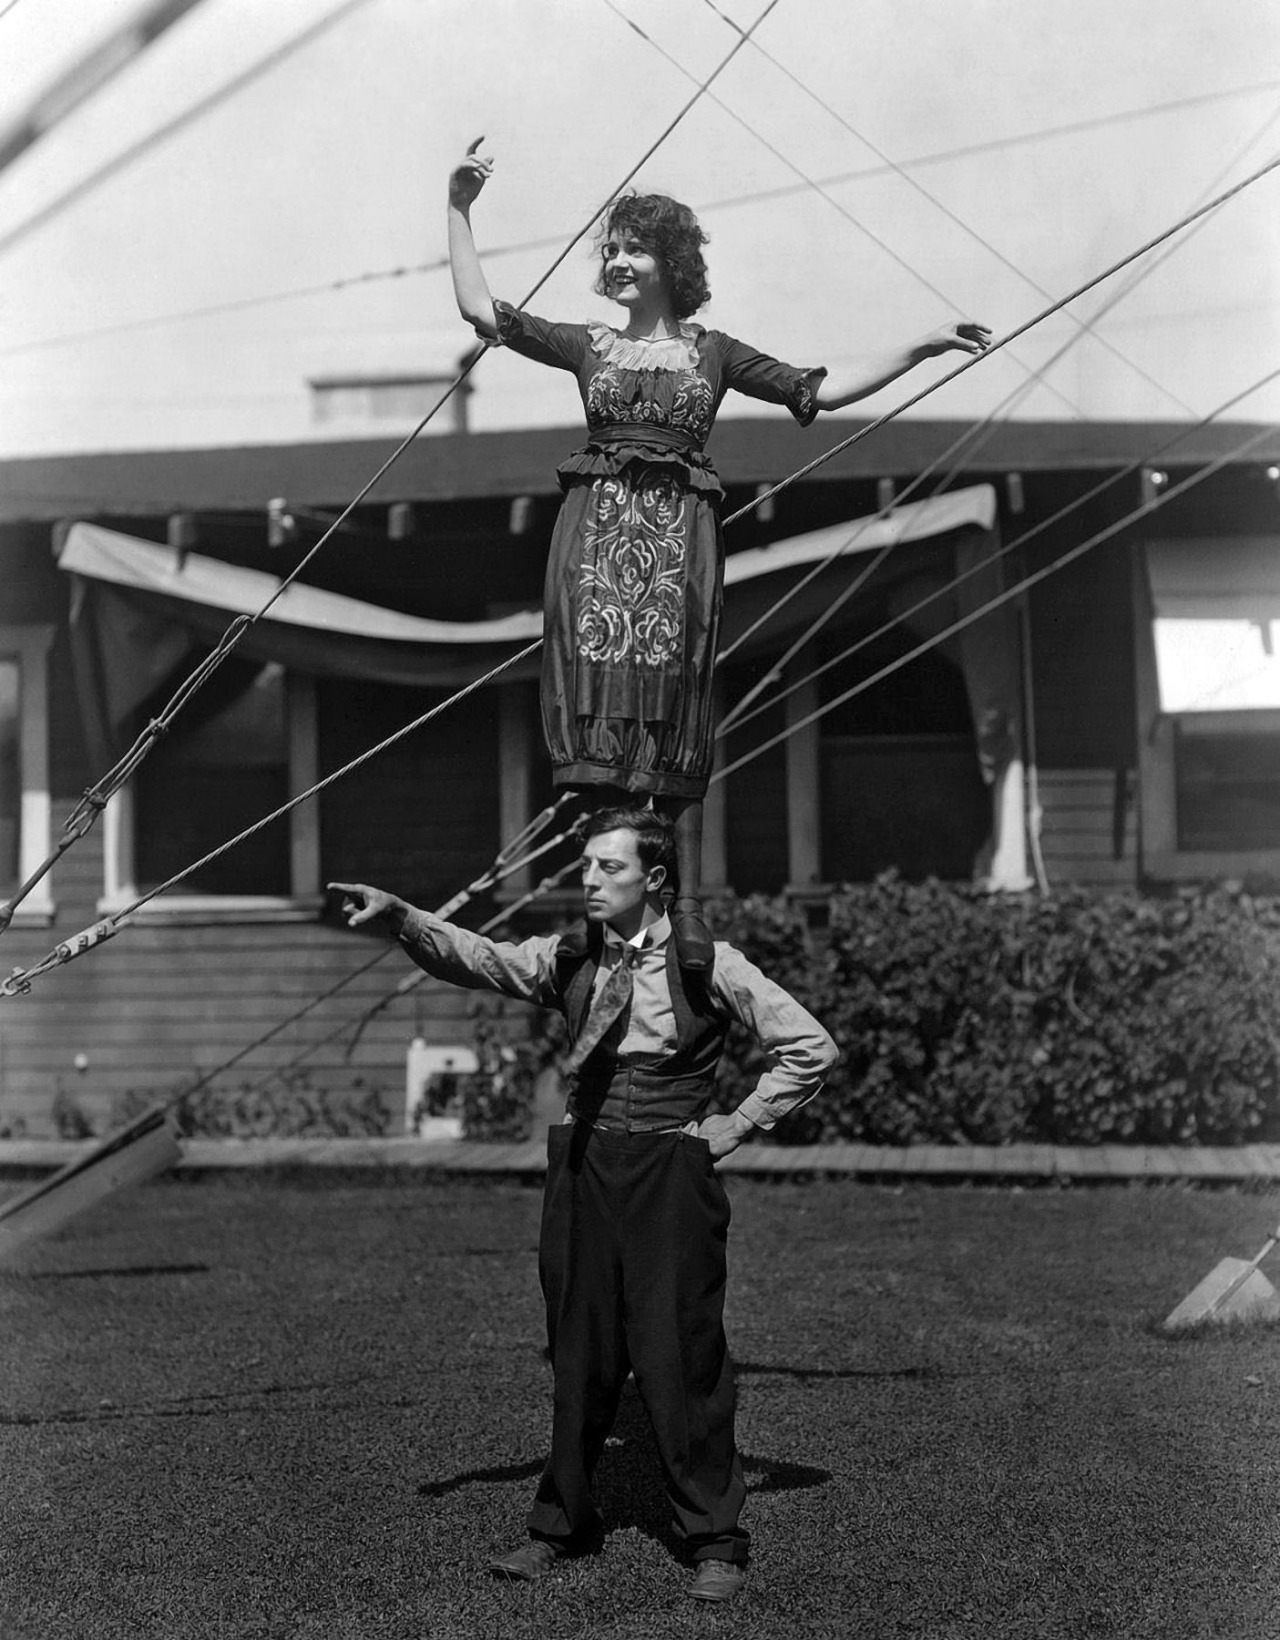  Sybil Seely atop Buster Keaton. Interestingly, she was married to top Hollywood